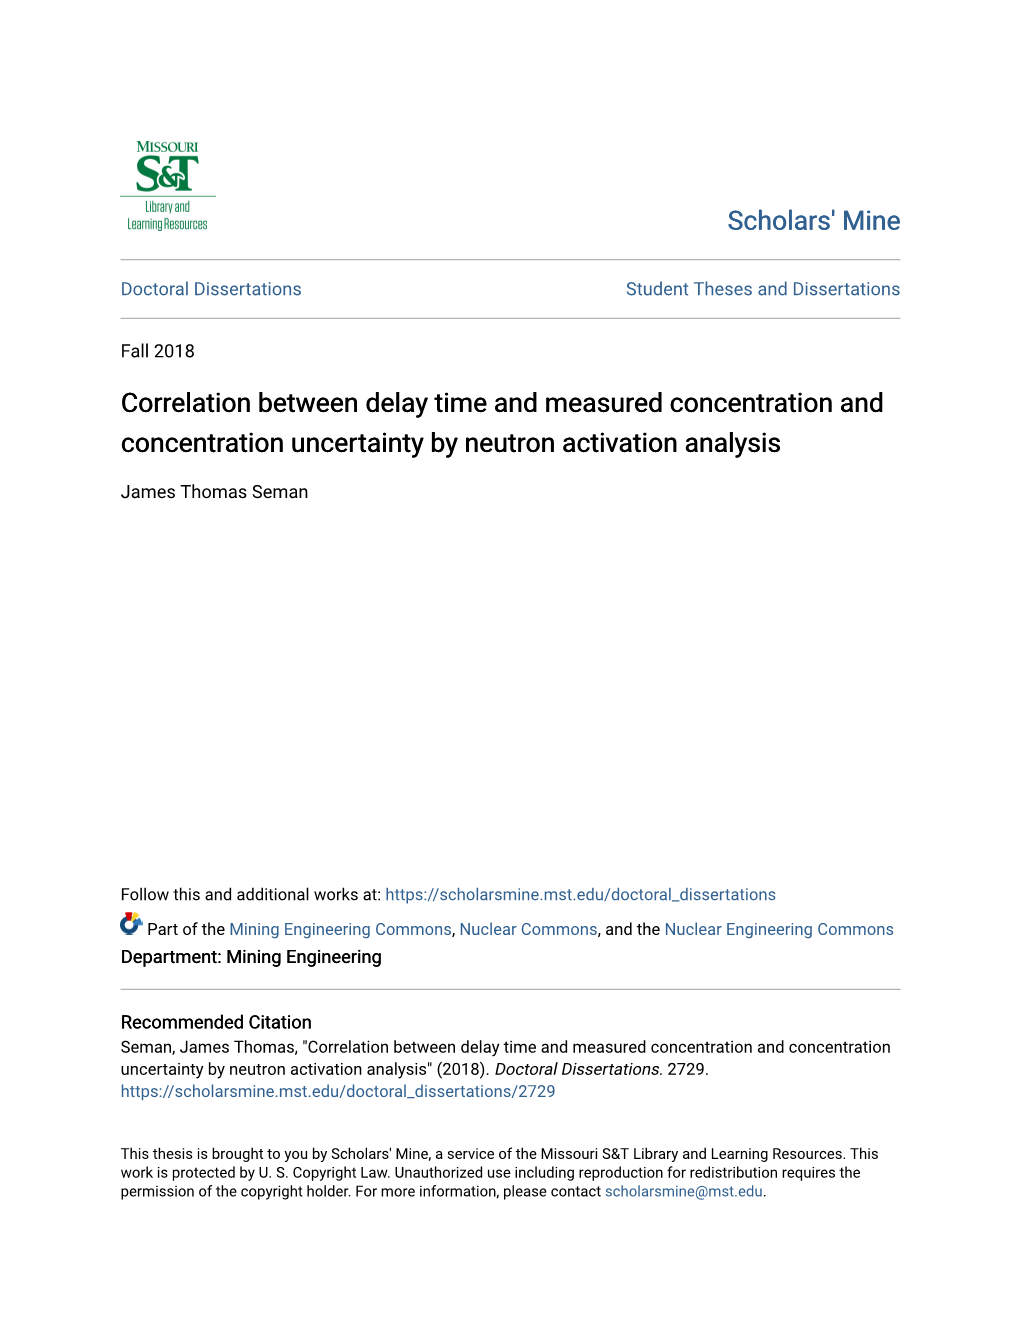 Correlation Between Delay Time and Measured Concentration and Concentration Uncertainty by Neutron Activation Analysis